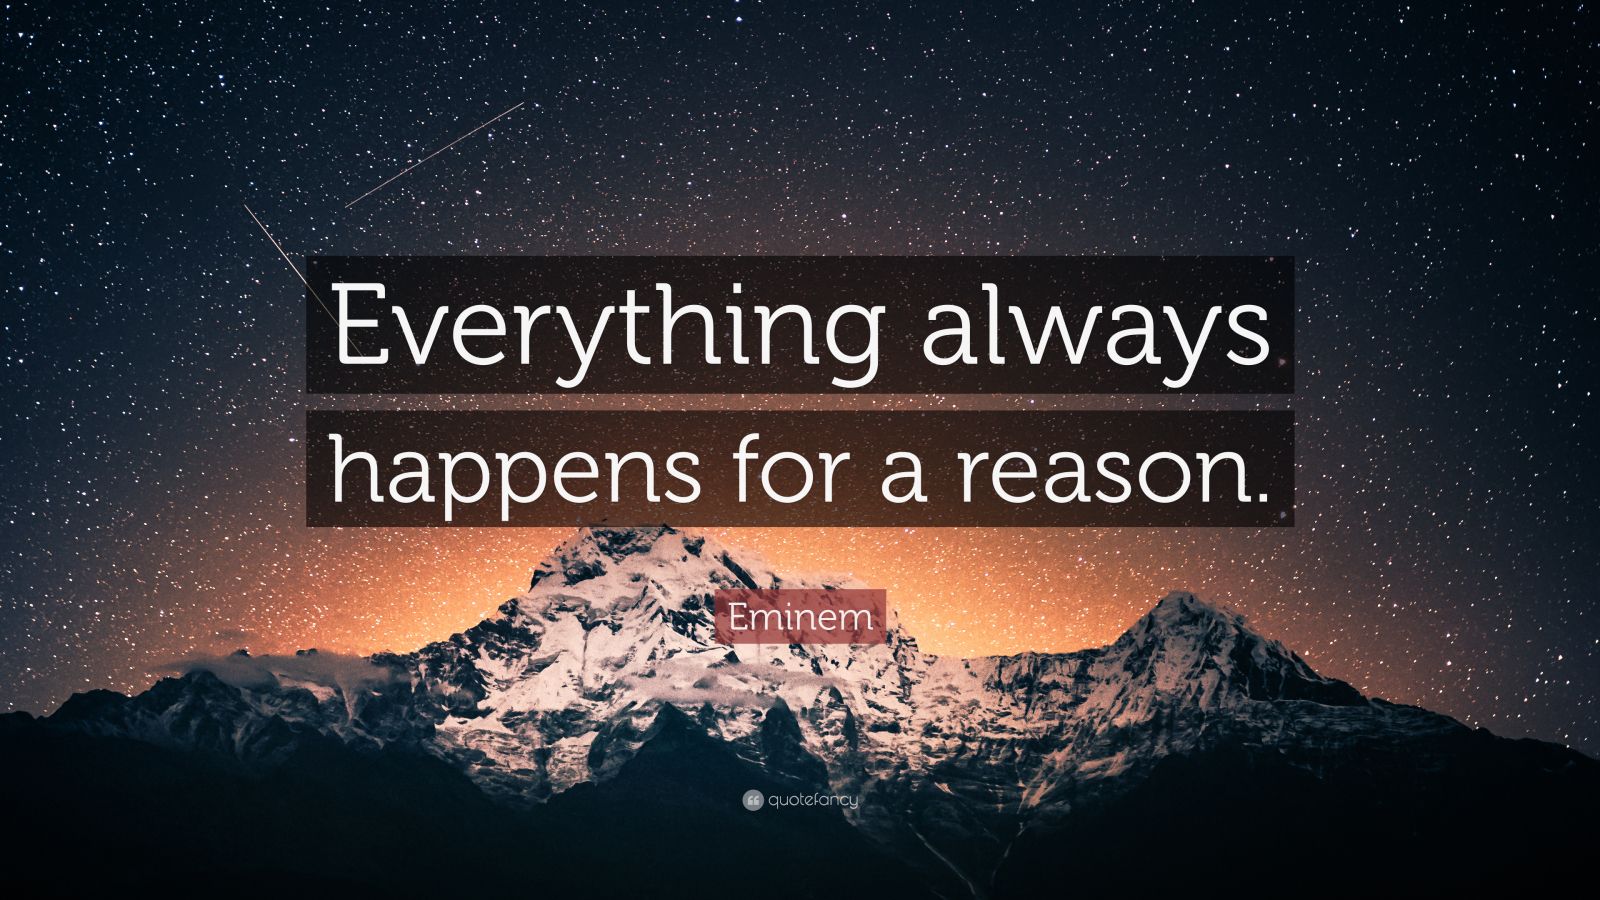 everything happens for a reason แปลว่า